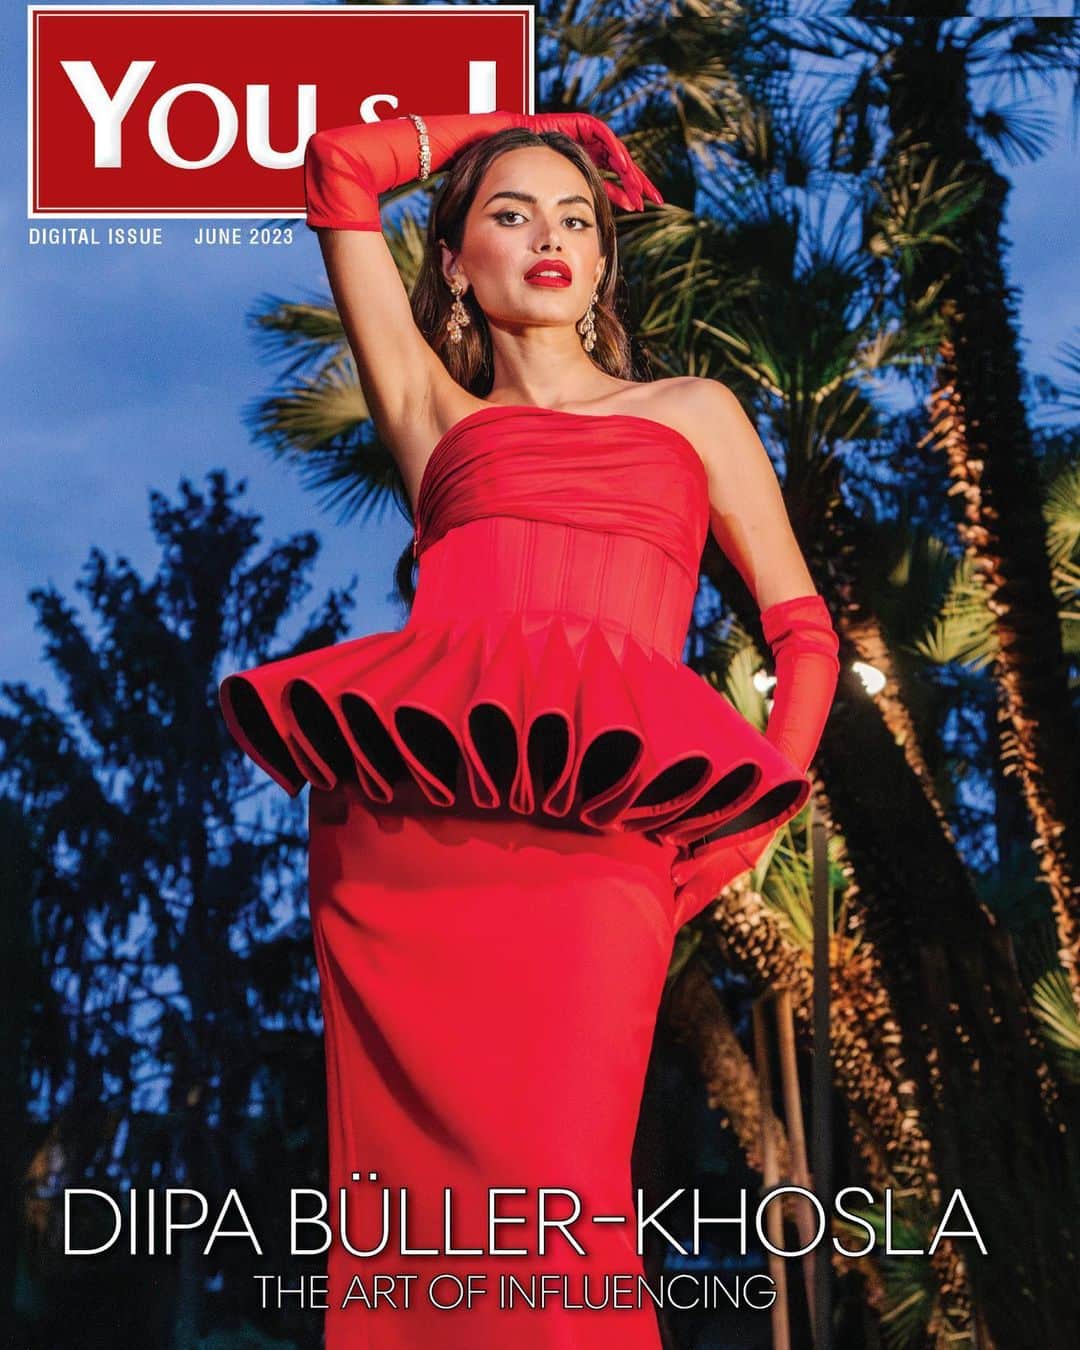 Diipa Büller-Khoslaのインスタグラム：「On our June Digital cover we have the stunning Diipa Büller-Khosla @diipakhosla , a visionary who is changing the landscape of content creation one post at a time. A lawyer turned digital influencer and entrepreneur, she is not only passionate about championing the age old science of Aryuveda through her beauty brand @indewild but she's also an anti colourism advocate who's been consistently partaking in social media activism with support from various trade bodies and festivals from around the world. Whether it’s fashion, beauty, travel, or relationships, her posts reach a global audience and create a sense of belonging within her community. Read more about her in the People In Focus section of our July issue! . . Outfit: @robertwun Jewellery: @raniwala1881 Styling: @thomasgeorgewulbern Make-Up: @tina_derkse Hair: @Franckprovostparis Photography: @natashagillett.art Artist's Publicity: @dreamnhustlemedia Co-Ordination: @nadiiaamalik Interview by: @niharika.keerthi   Follow @youandimag @youandimagweddings @niharika.keerthi for more   #DiipaKhosla #influencer #globalinfluencer #contentcreator #blogger #fashion #lifestyle #fashiongram #youandimag #youandimagweddings」